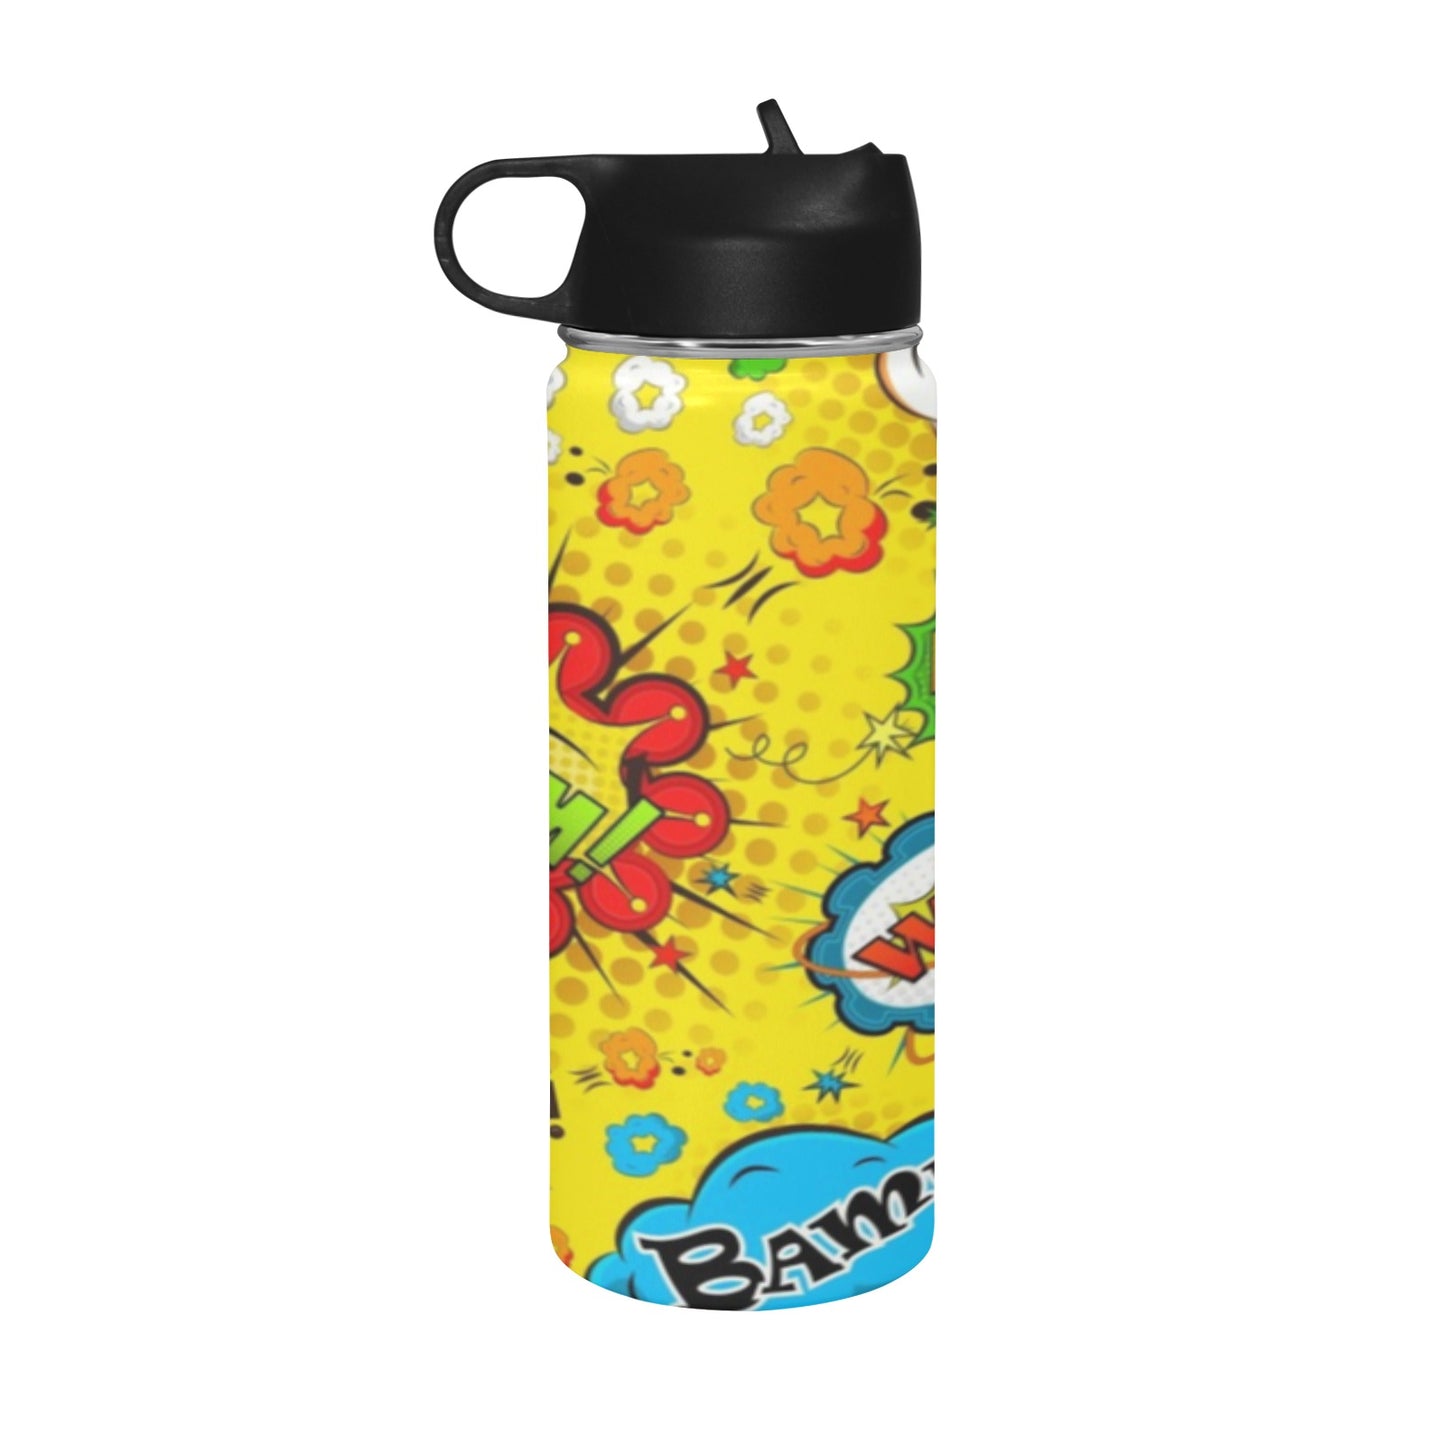 Comic Book Yellow Insulated Water Bottle with Straw Lid (18 oz) Insulated Water Bottle with Straw Lid